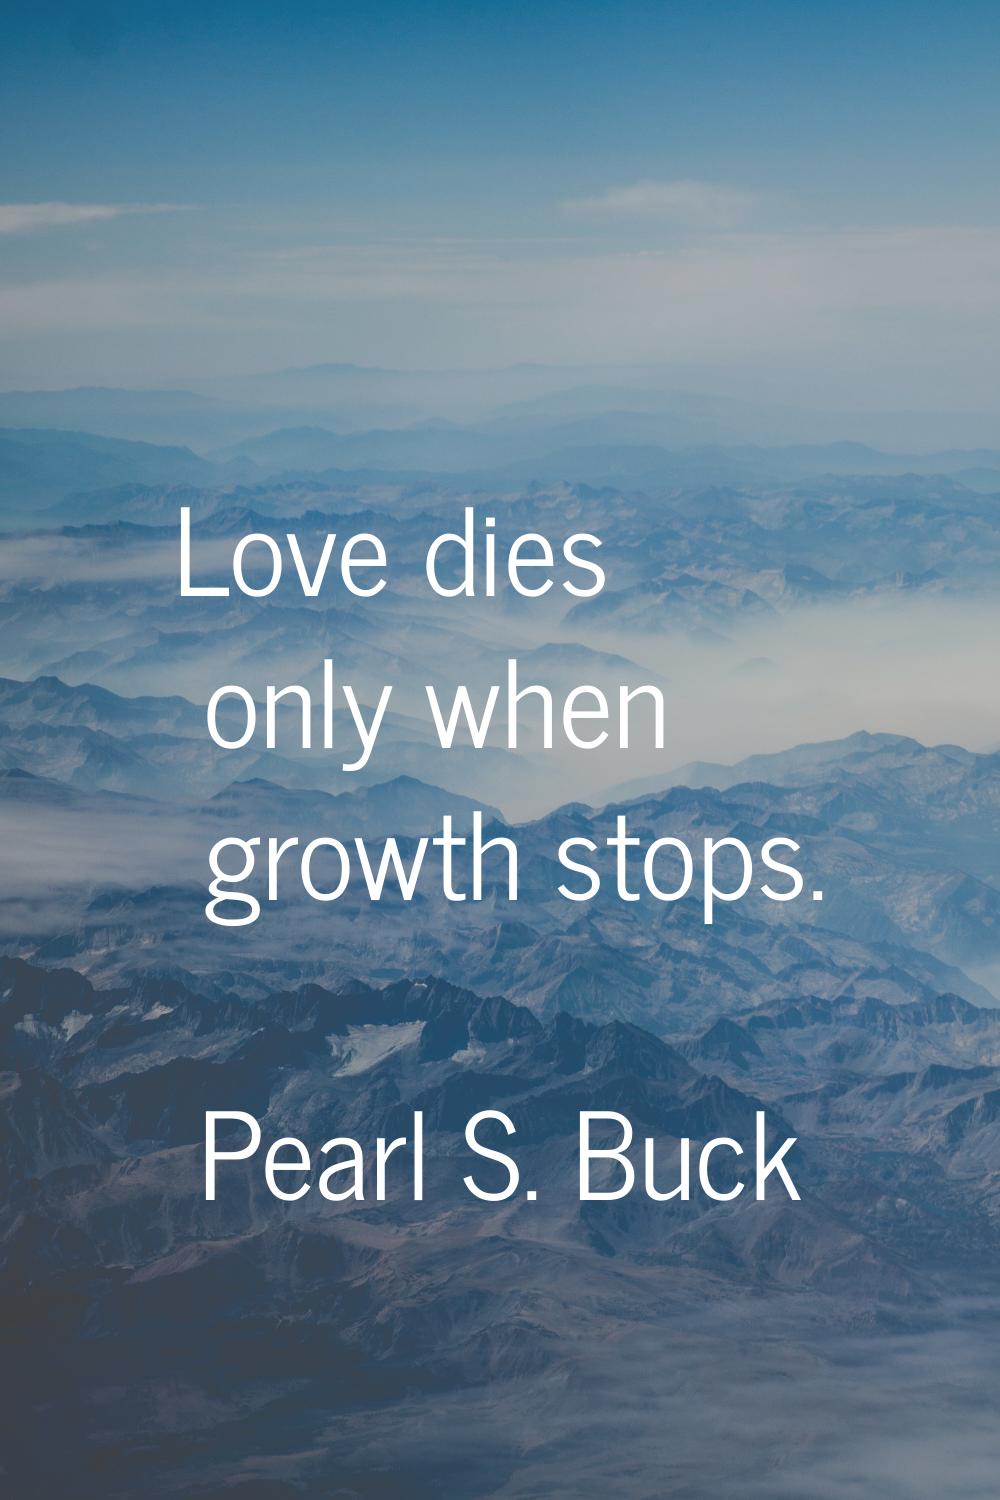 Love dies only when growth stops.